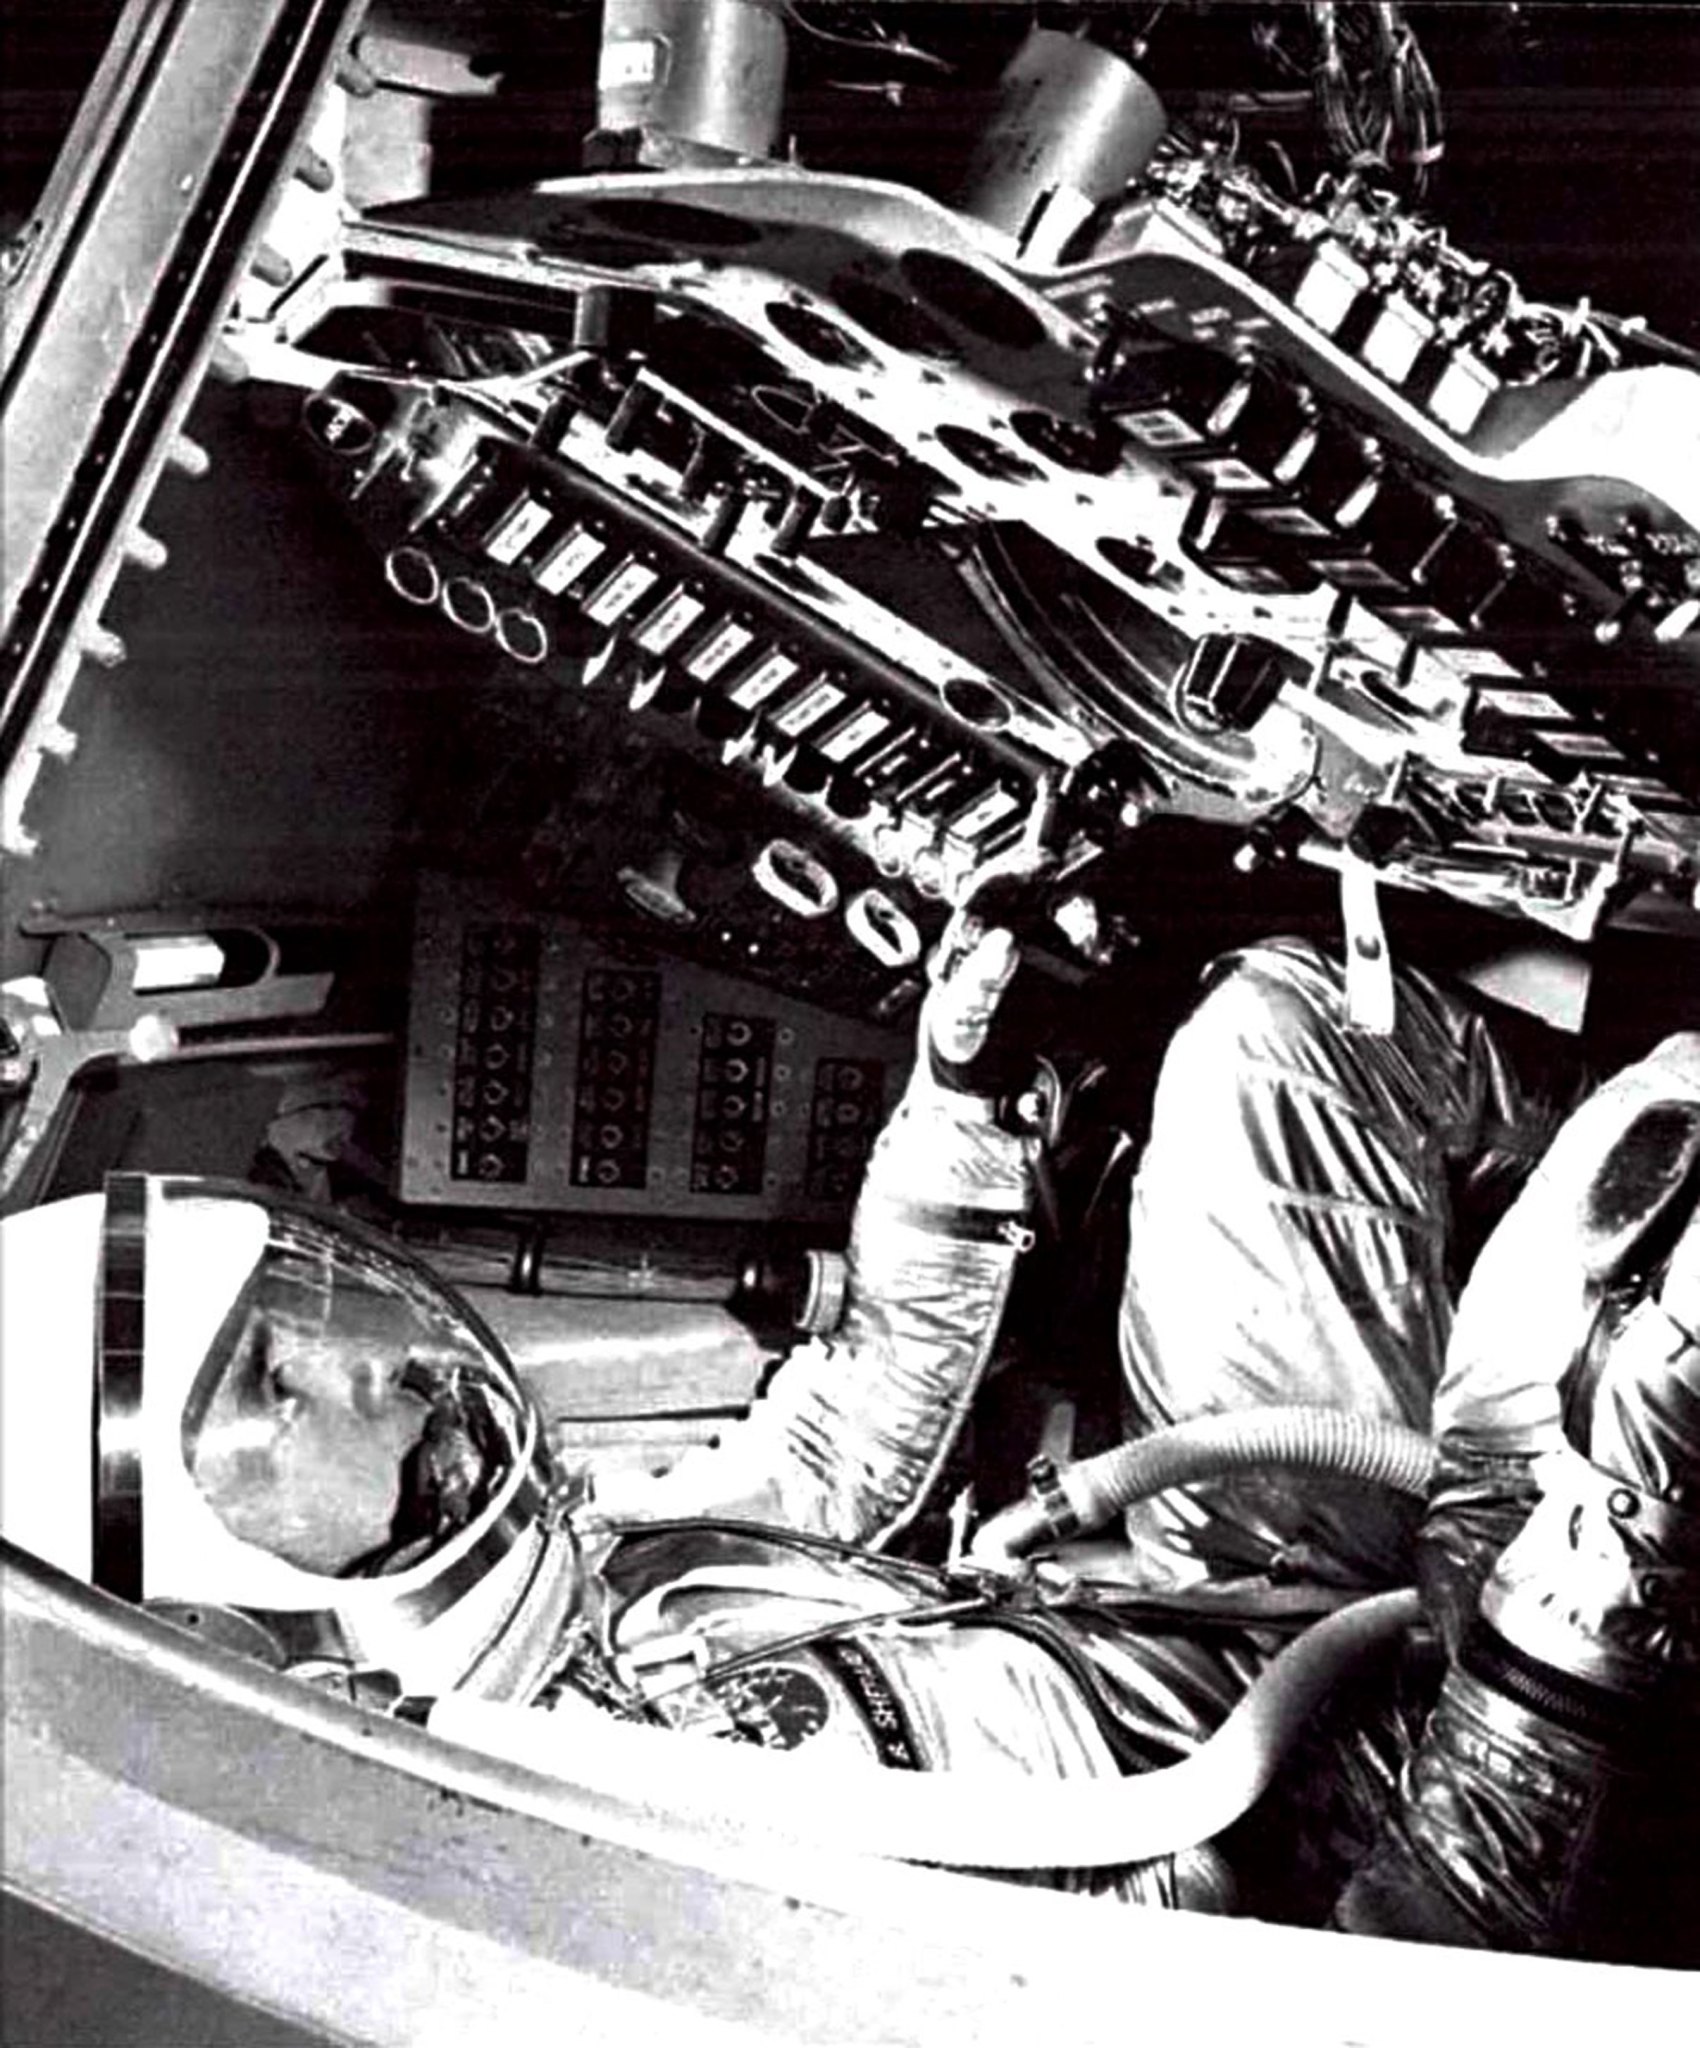 Alan Shepard is suited up in the Mercury trainer before launch